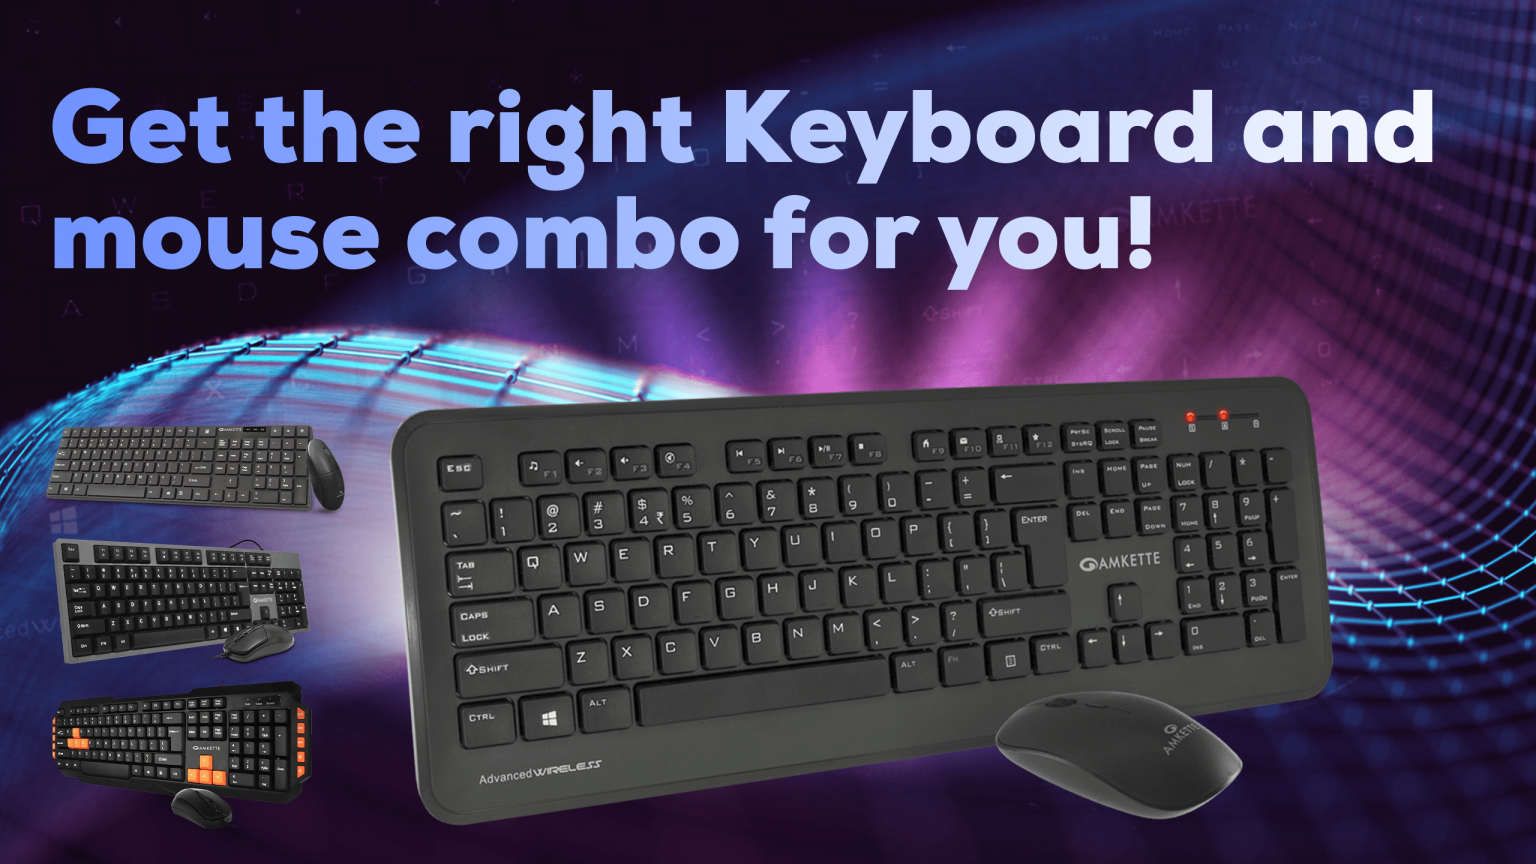 Get the right Keyboard and mouse combo for you!